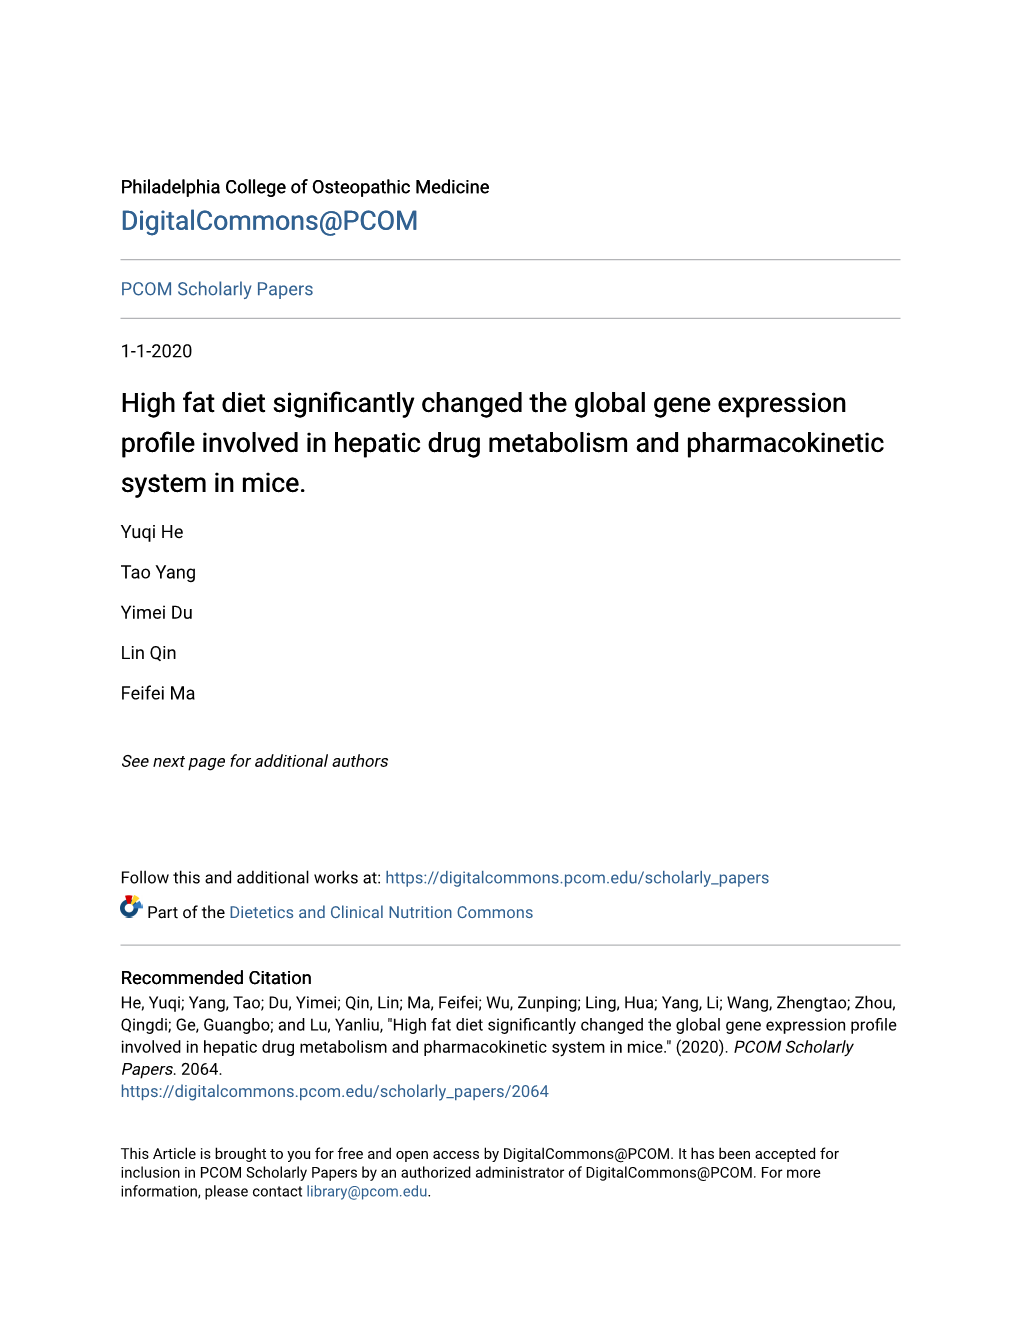 High Fat Diet Significantly Changed the Global Gene Expression Profile Involved in Hepatic Drug Metabolism and Pharmacokinetic System in Mice